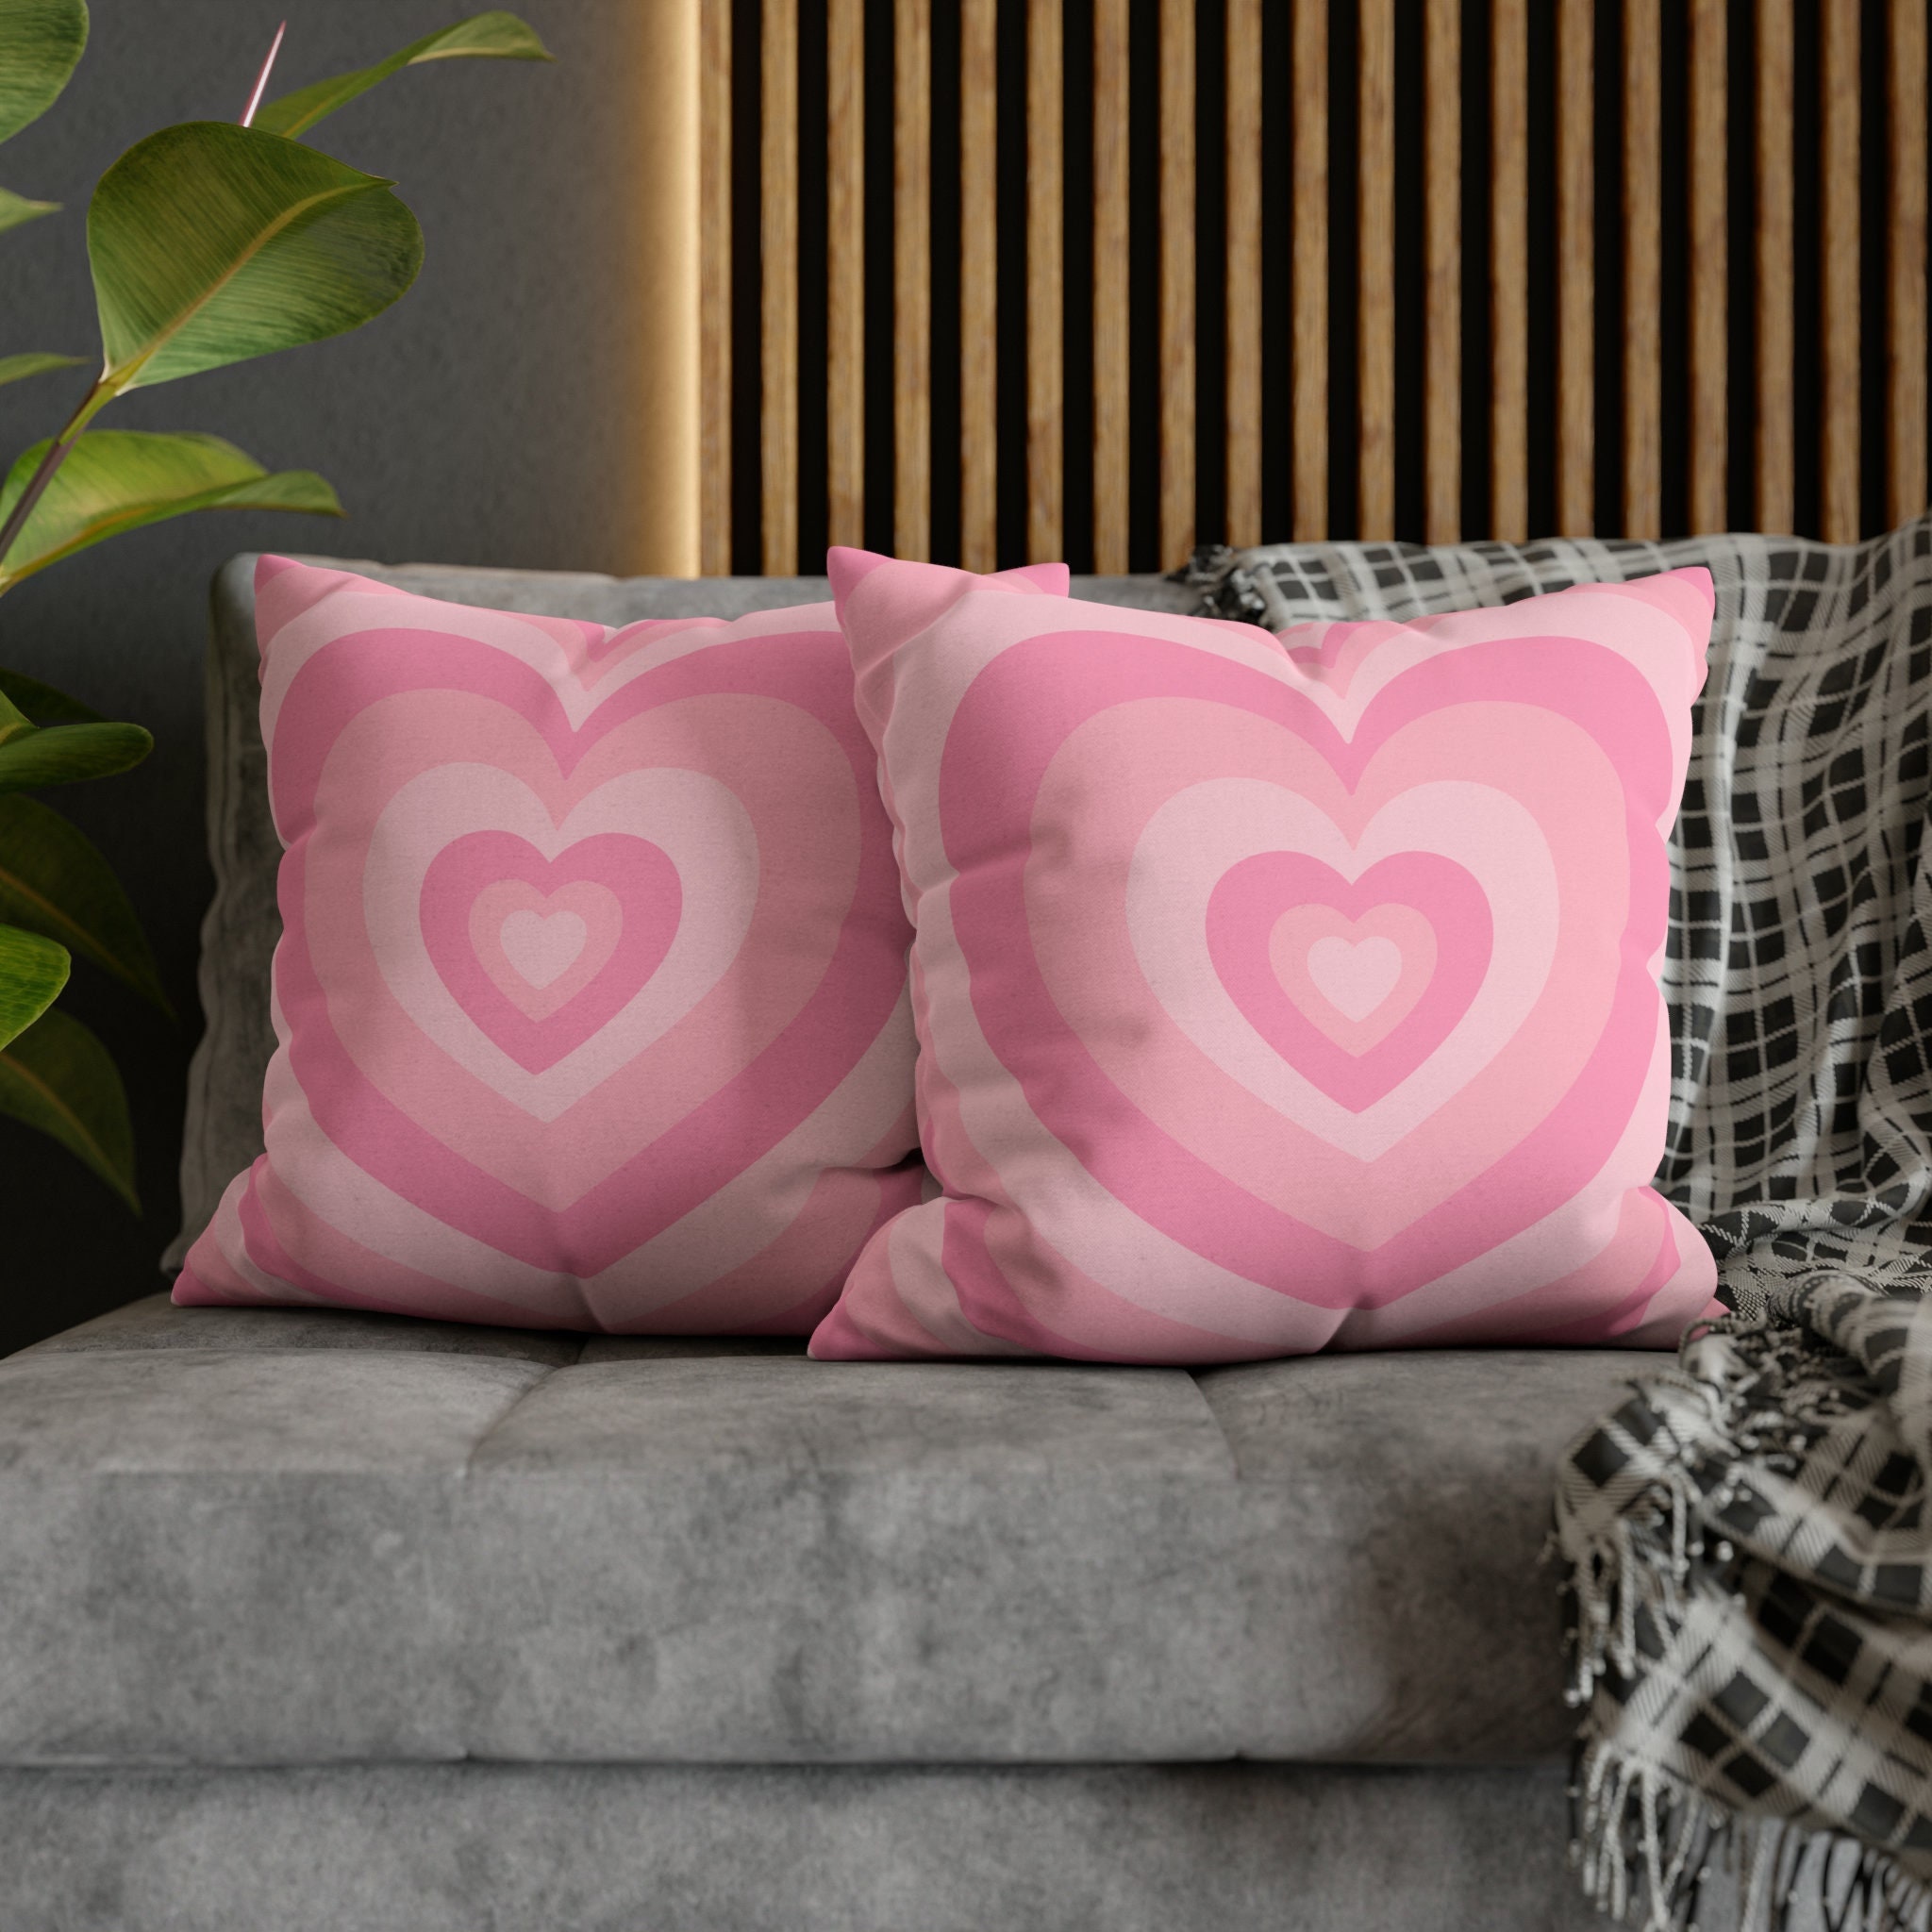 Pink Hearts Indie Aesthetic Throw Pillow, Preppy Pillows, Danish